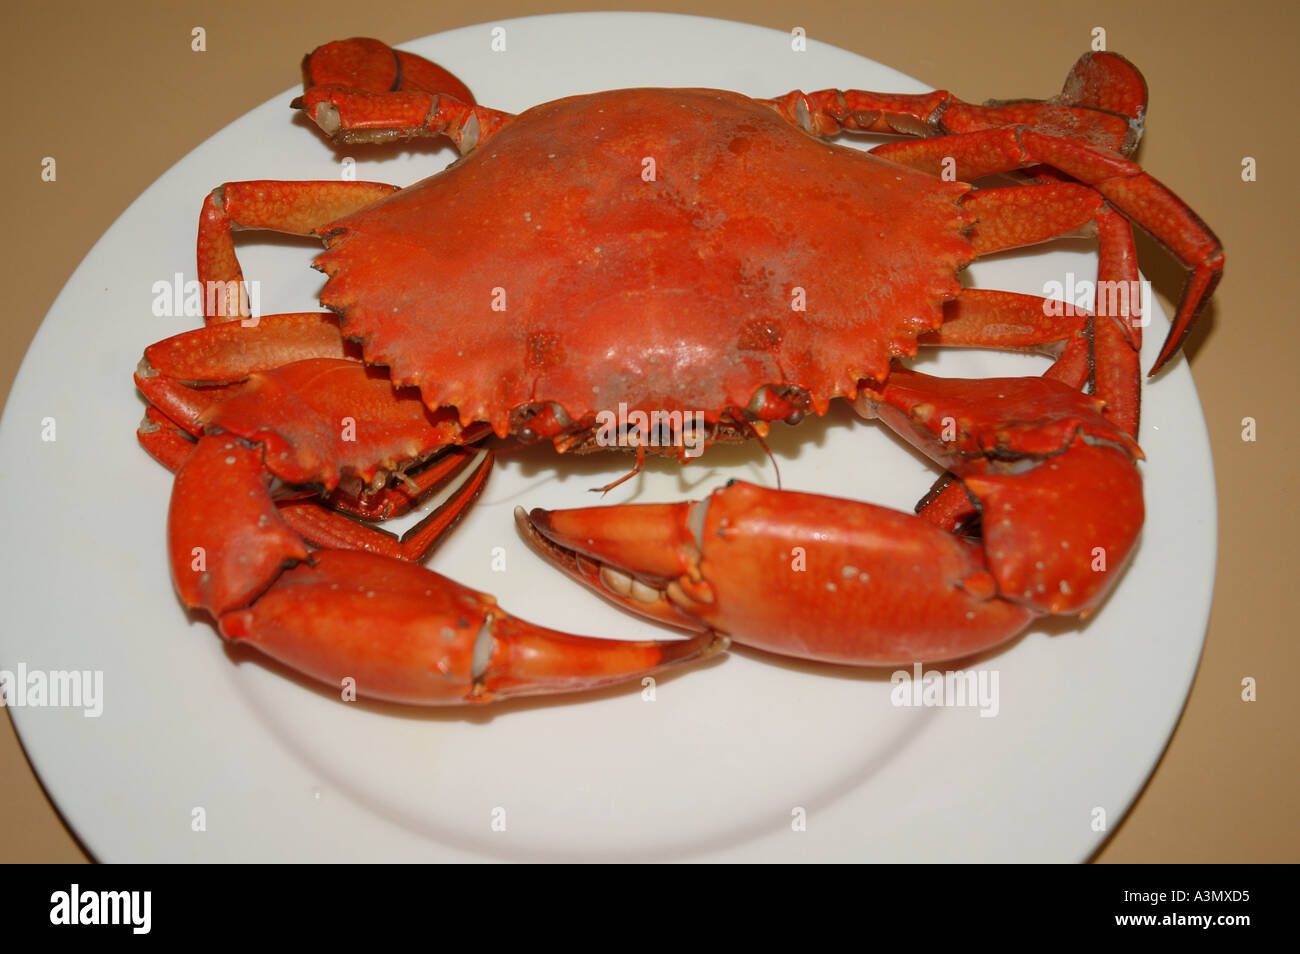 Queensland Mud Crab cooked and ready to eat dsca 0934 Stock Photo - Alamy